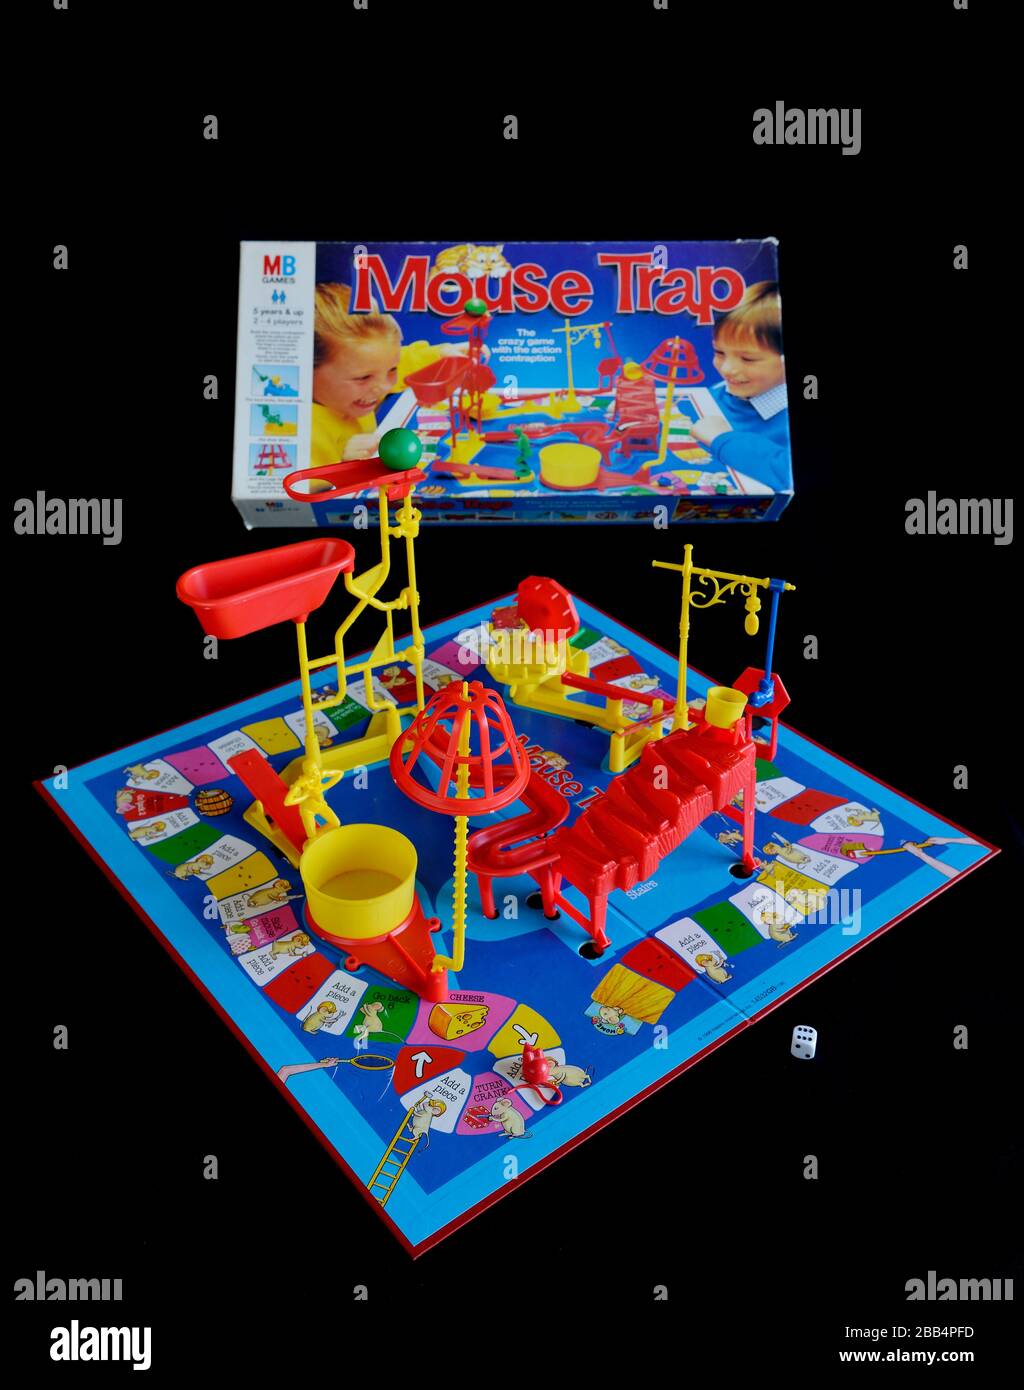 https://c8.alamy.com/comp/2BB4PFD/mouse-trap-mousetrap-board-game-and-box-against-a-black-background-2BB4PFD.jpg